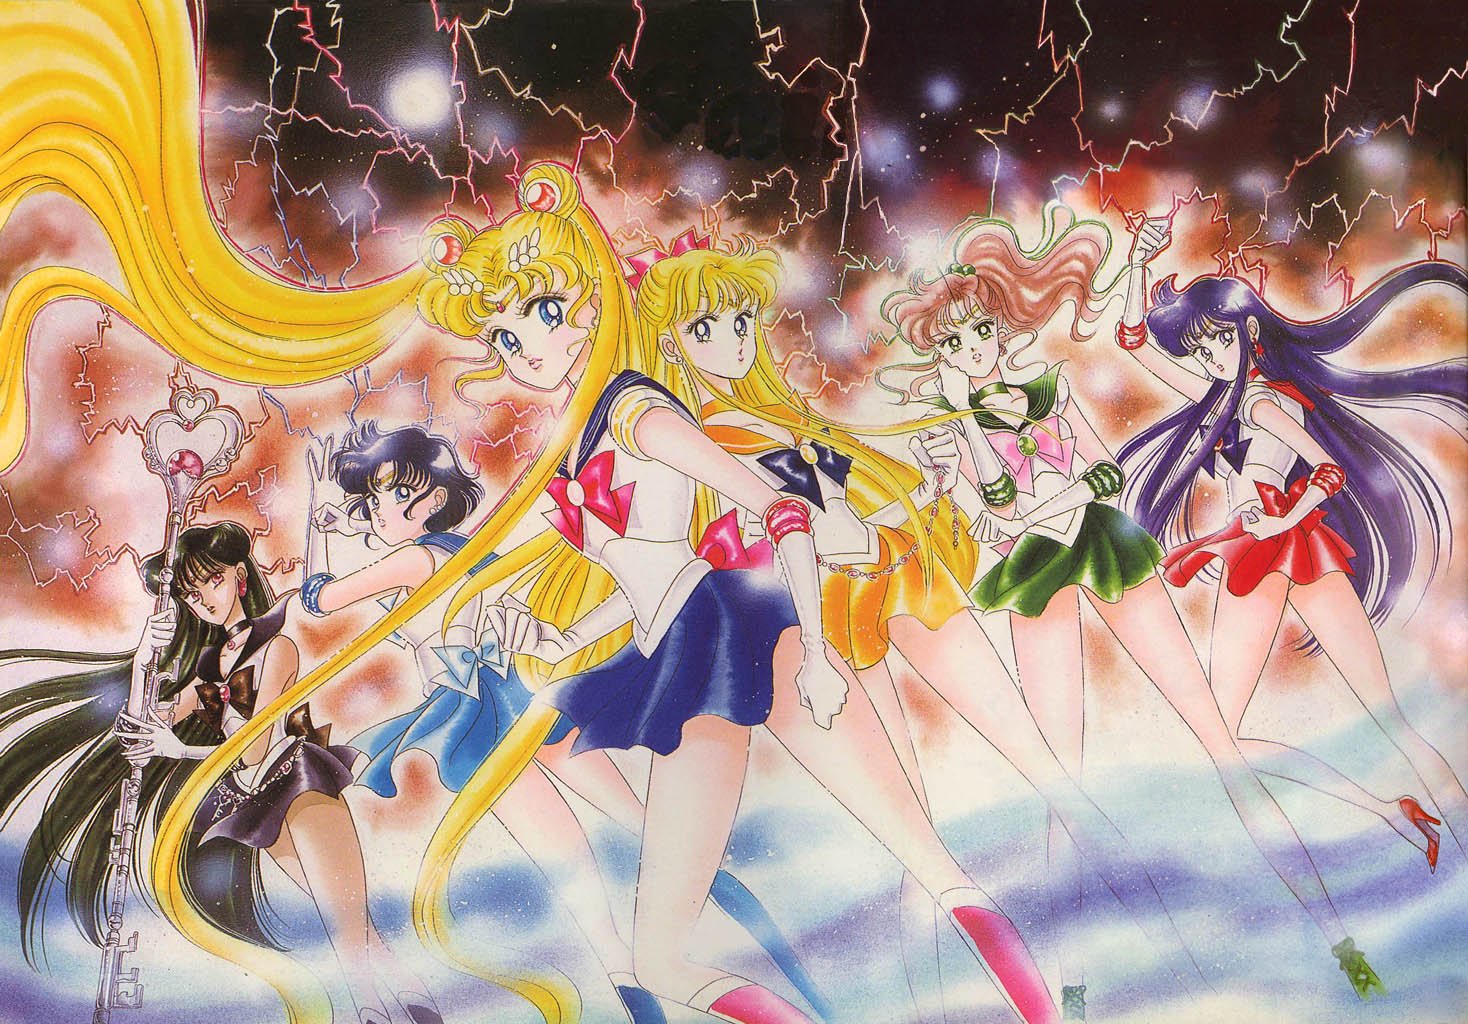 The Sailor Scouts in the manga as drawn by Naoko Takeuchi